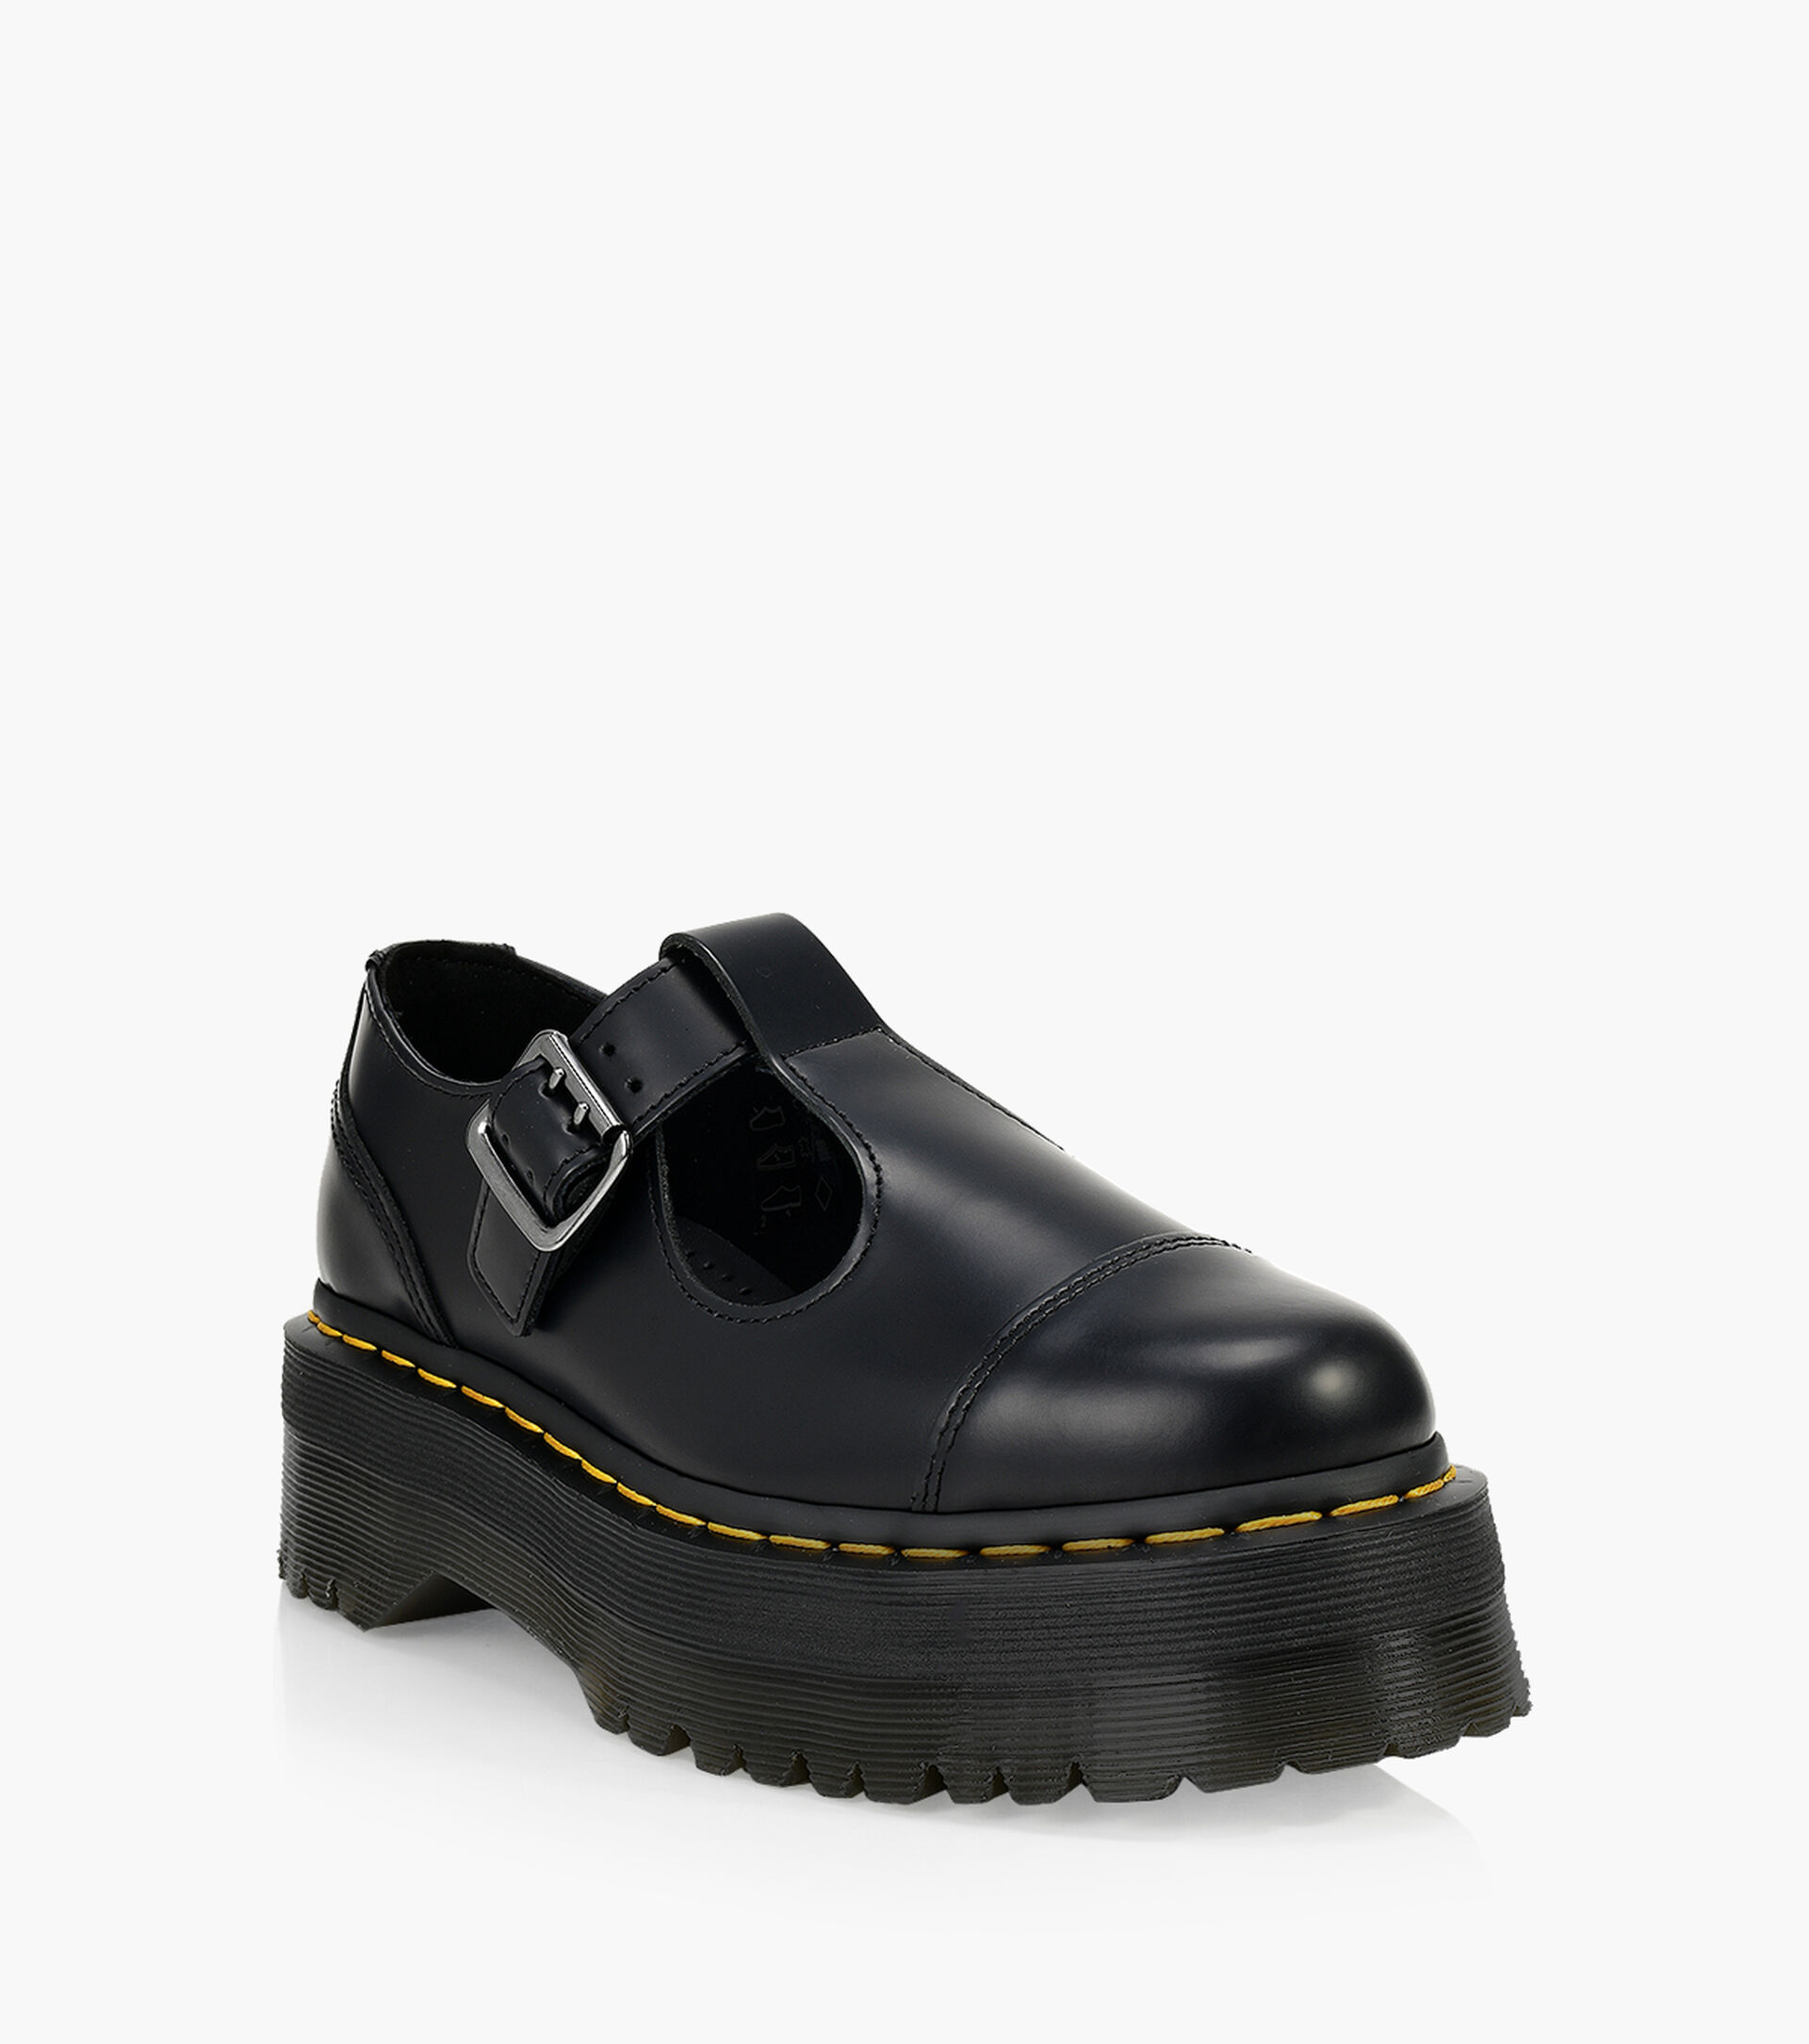 DR. MARTENS BETHAN - Black Leather | Browns Shoes